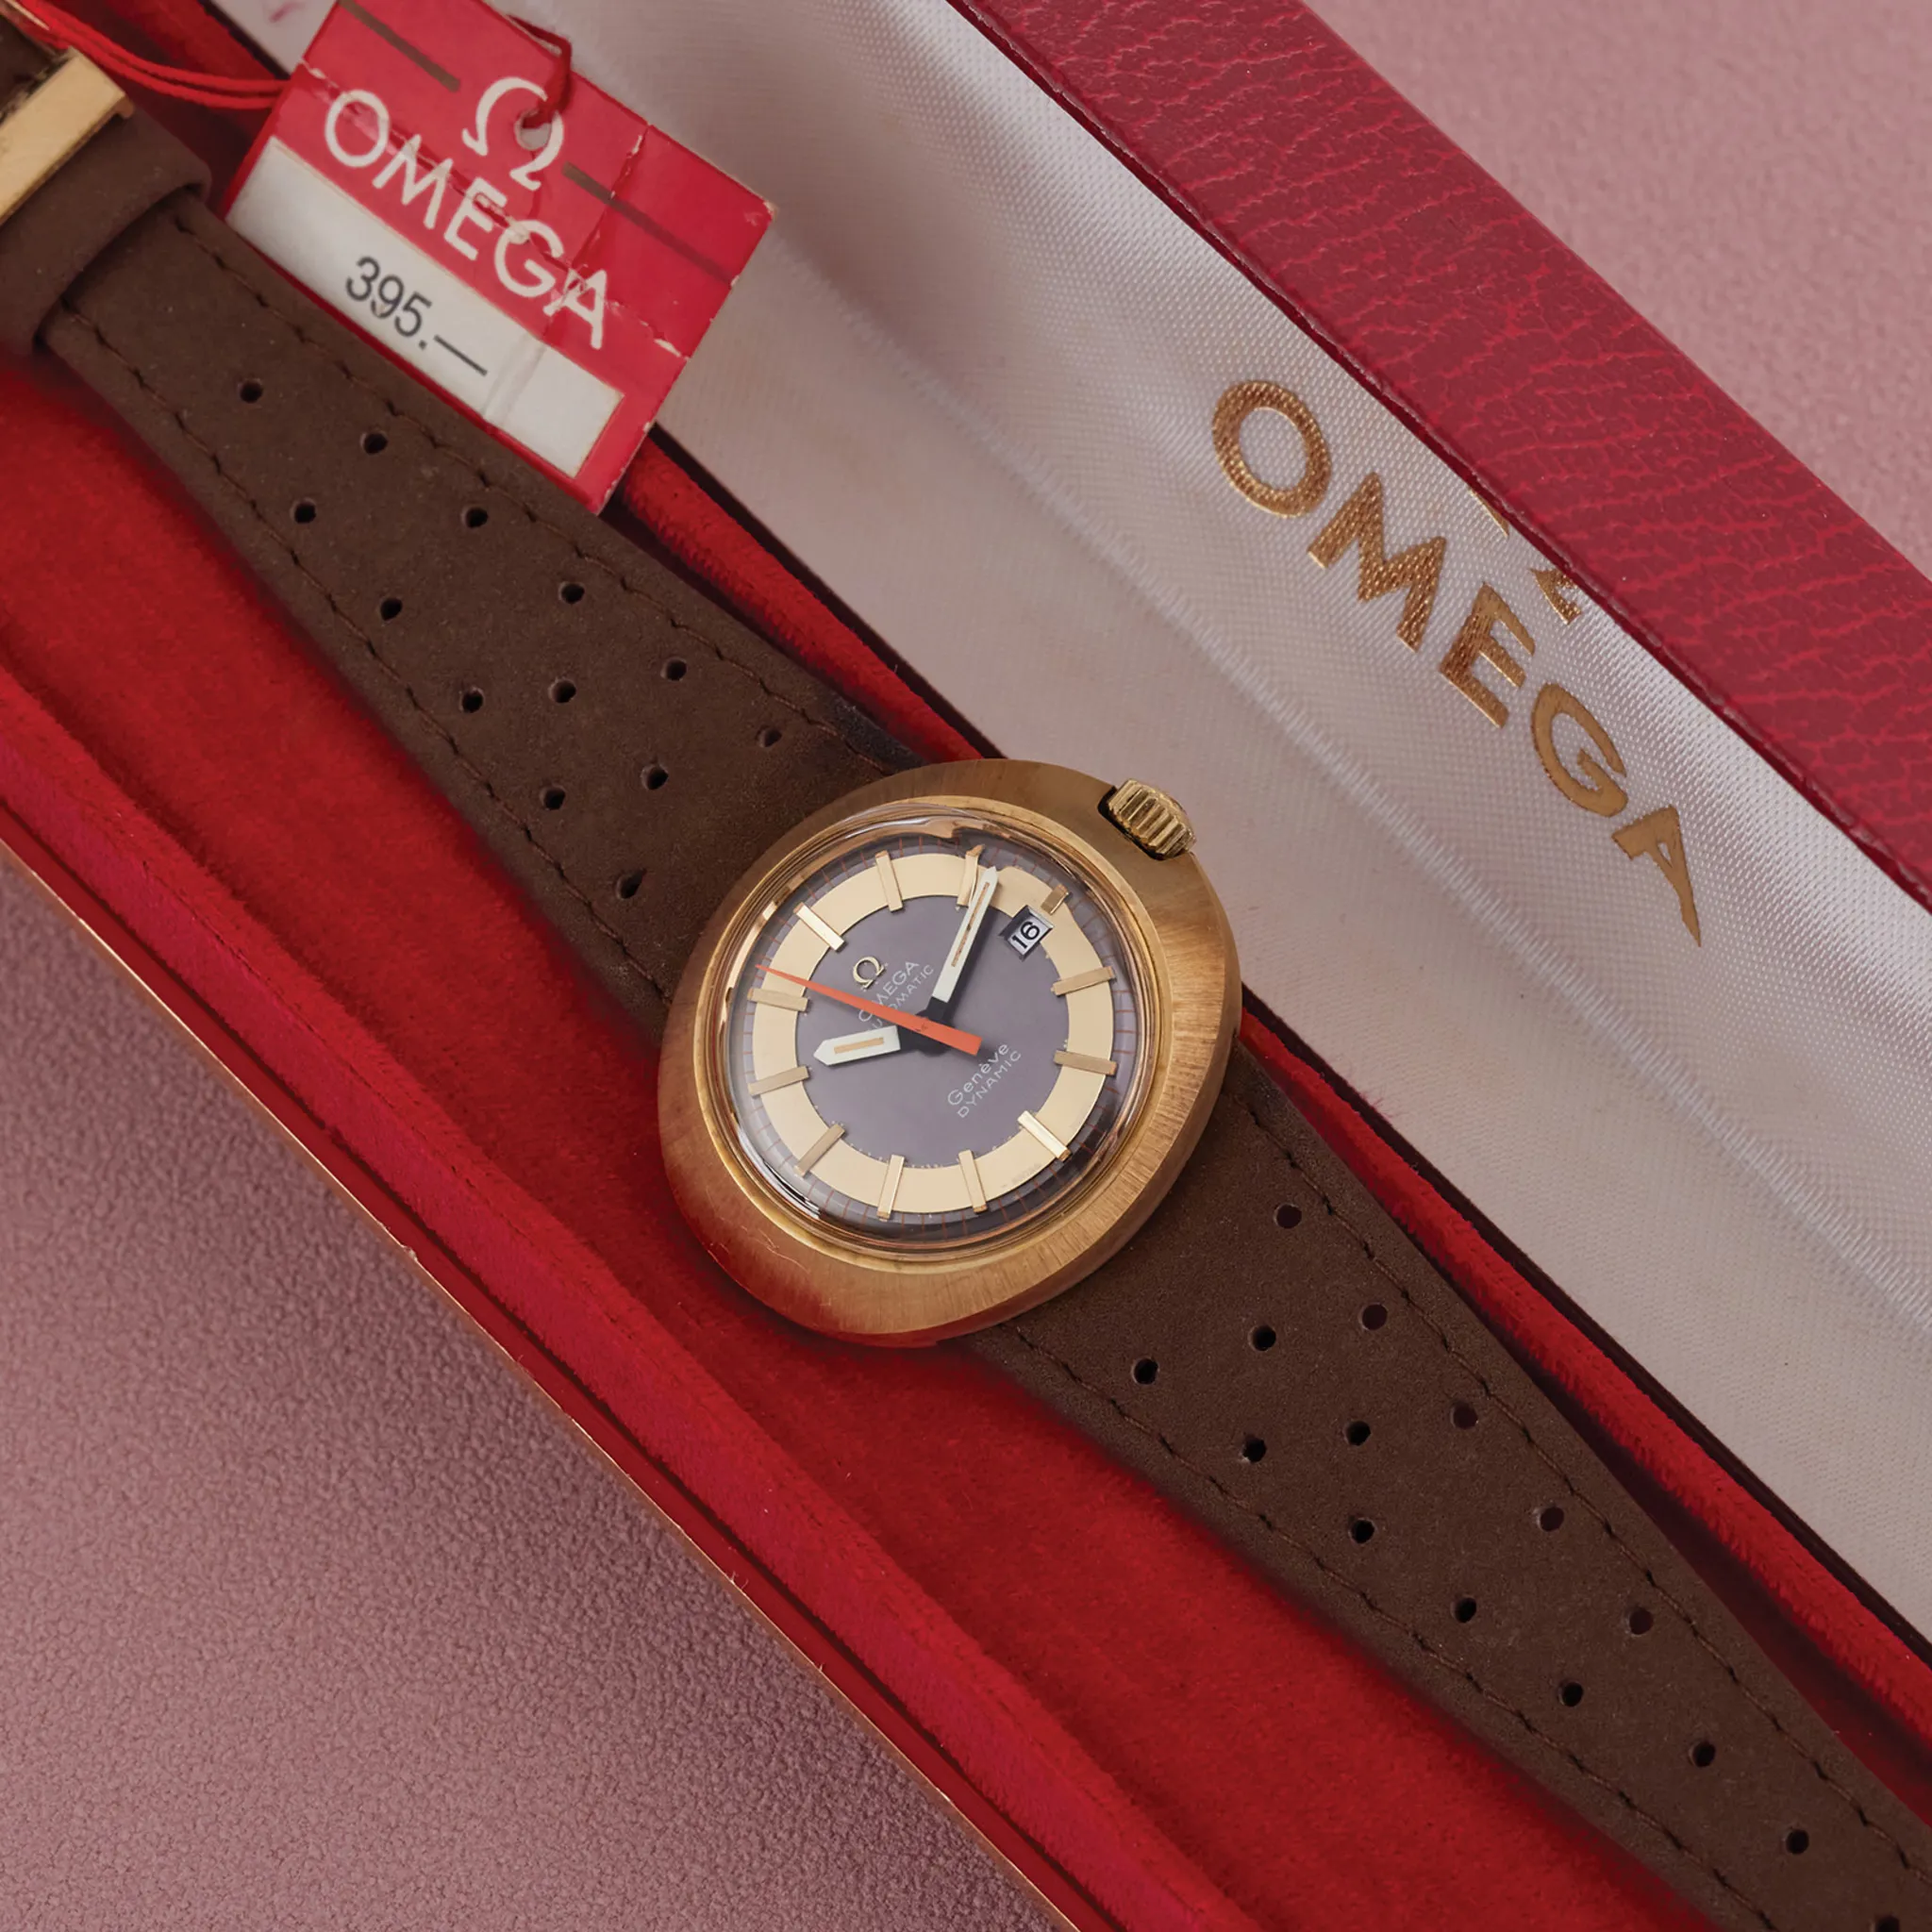 Omega Dynamic CD 566.0015 30mm Gold-capped steel Gold and grey